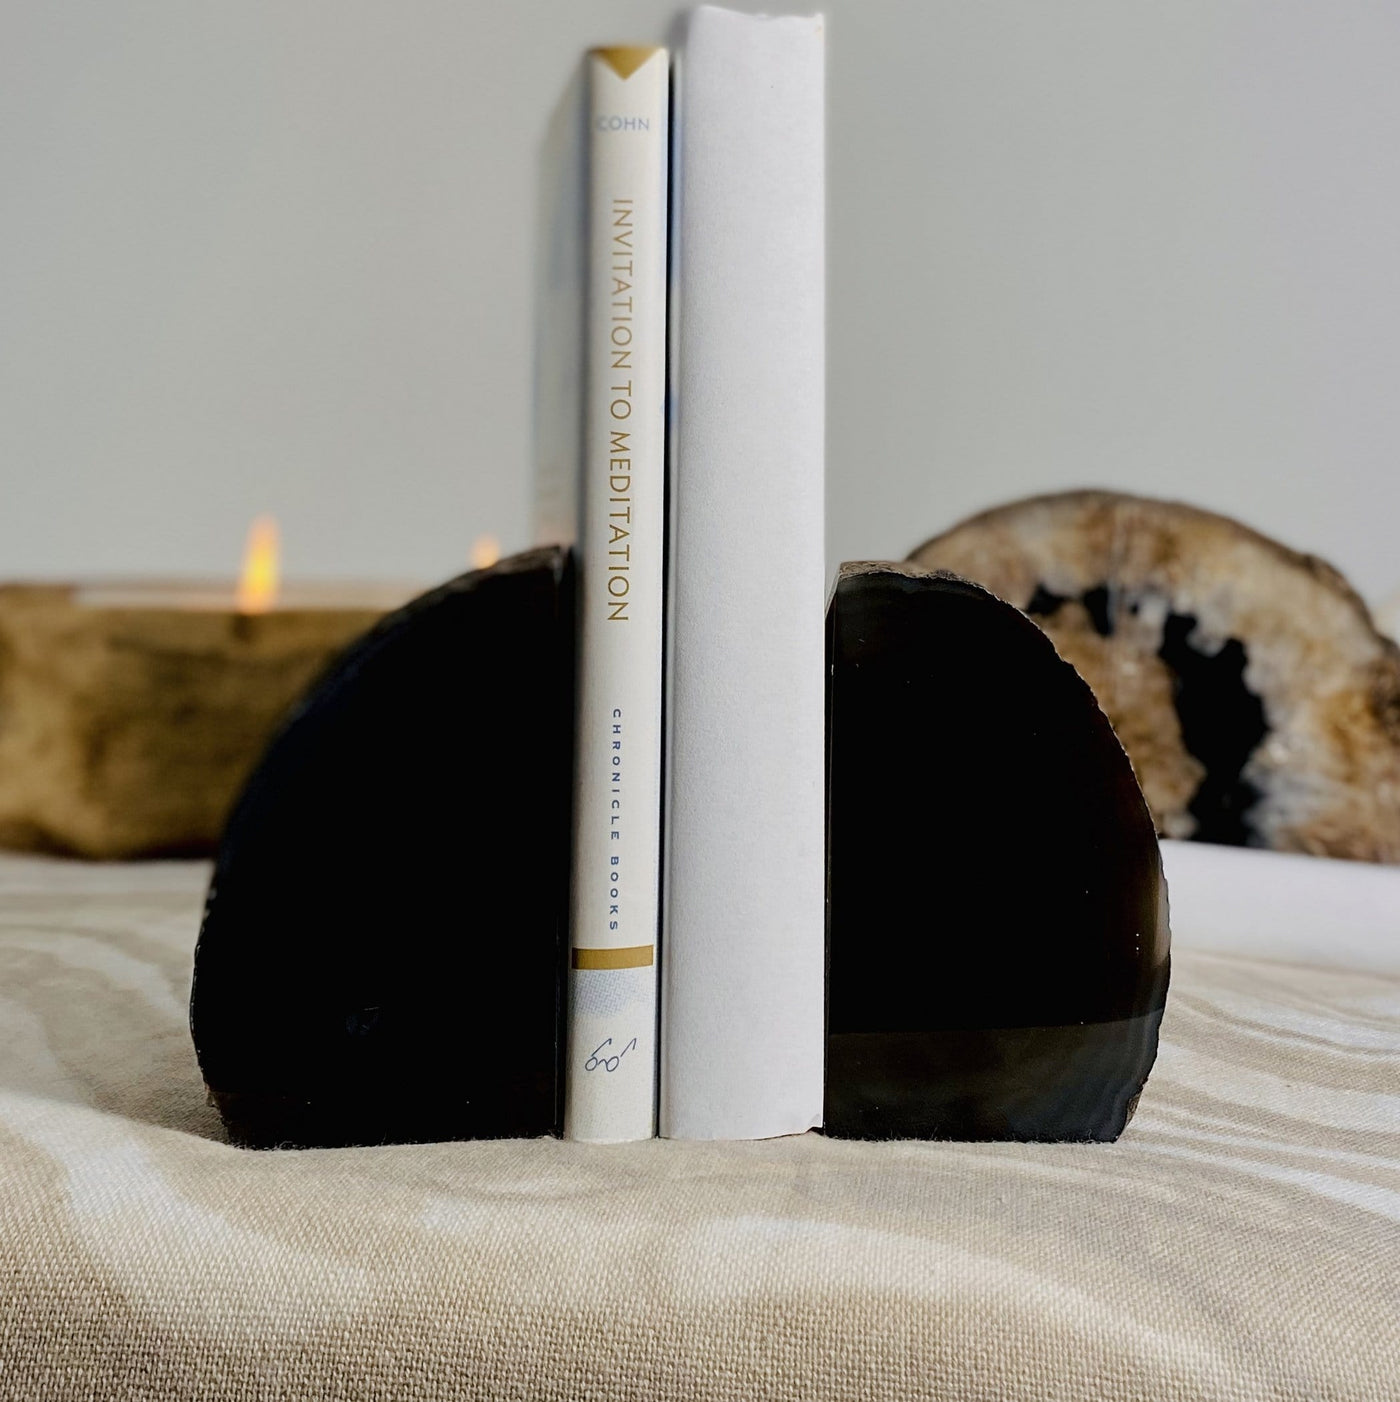 2 books in between a pair of a Black Agate Bookend